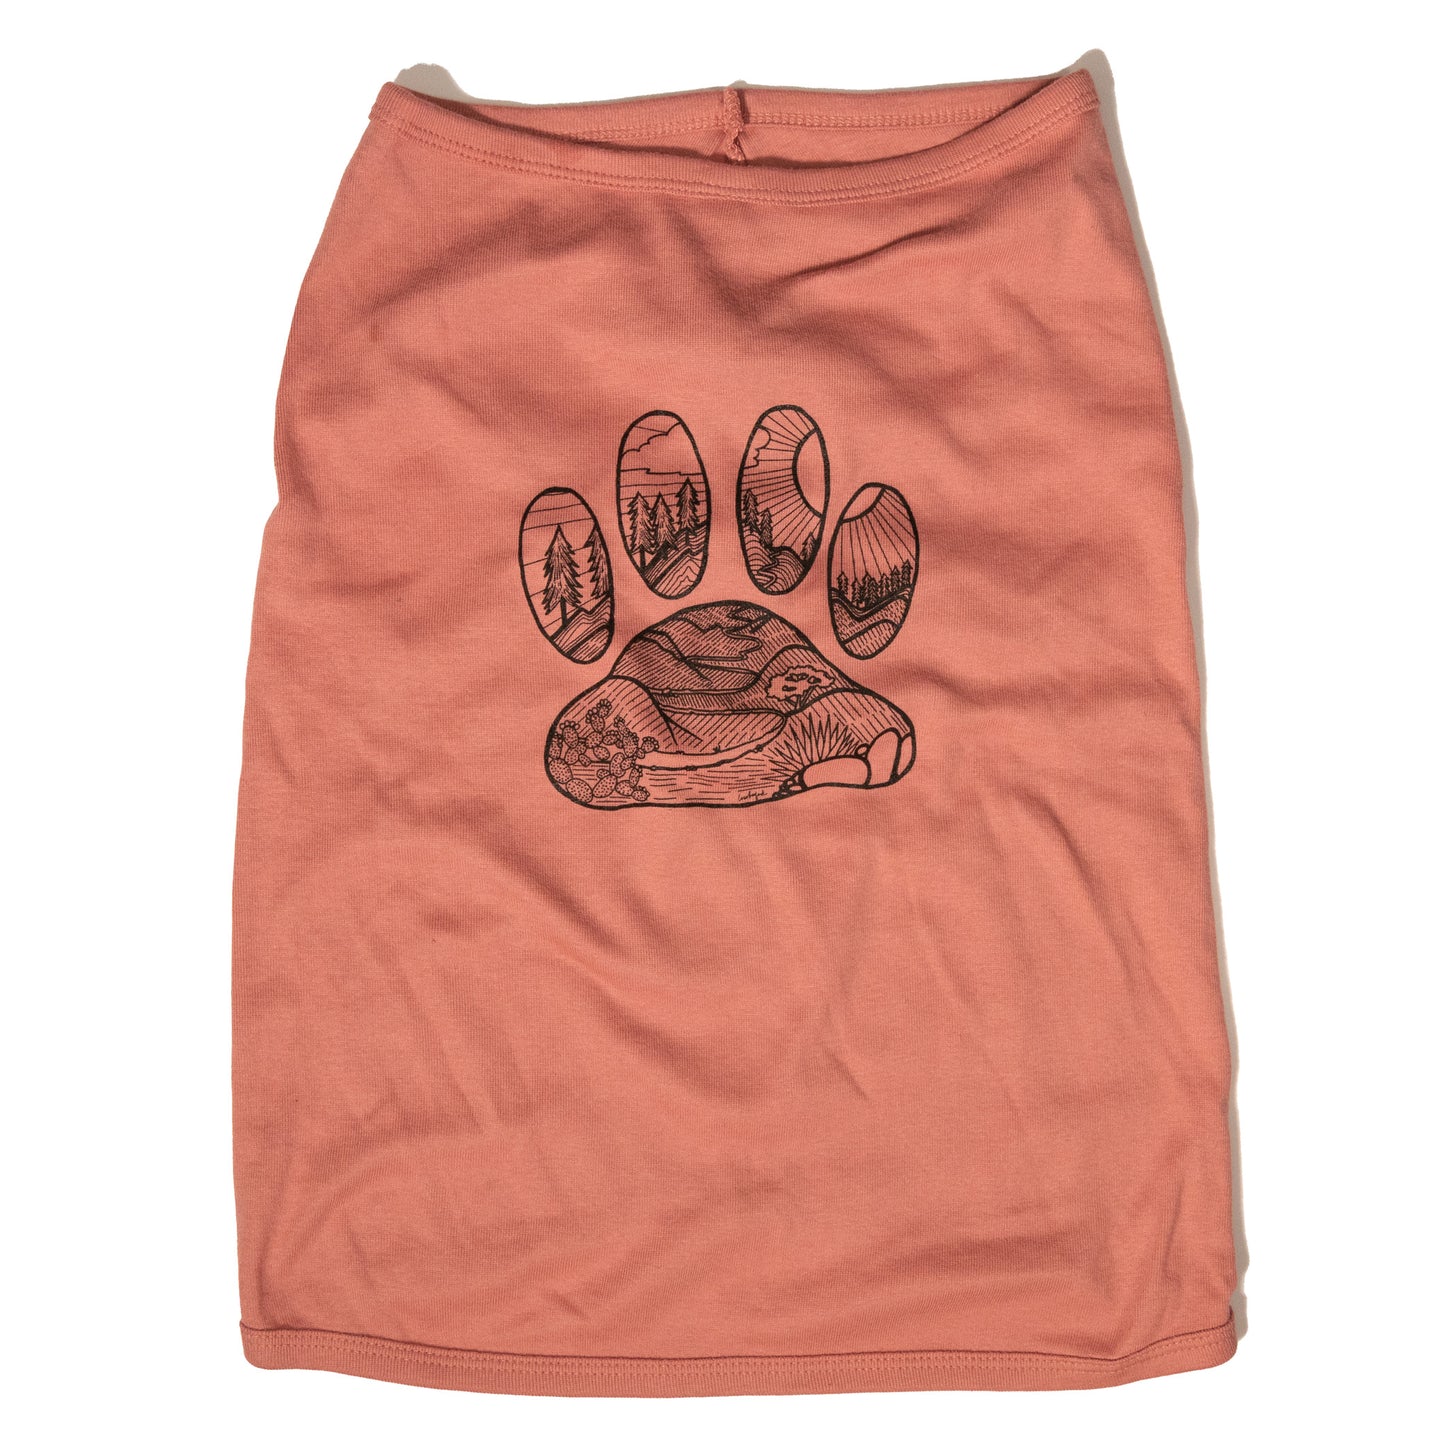 A mauve color dog shirt in a tank top style. The illustrated design on the back features a desert floor leading up to mountains with pine trees. The design is inside the shape of a dog paw print. The illustration is in black and the shirt color is mauve.